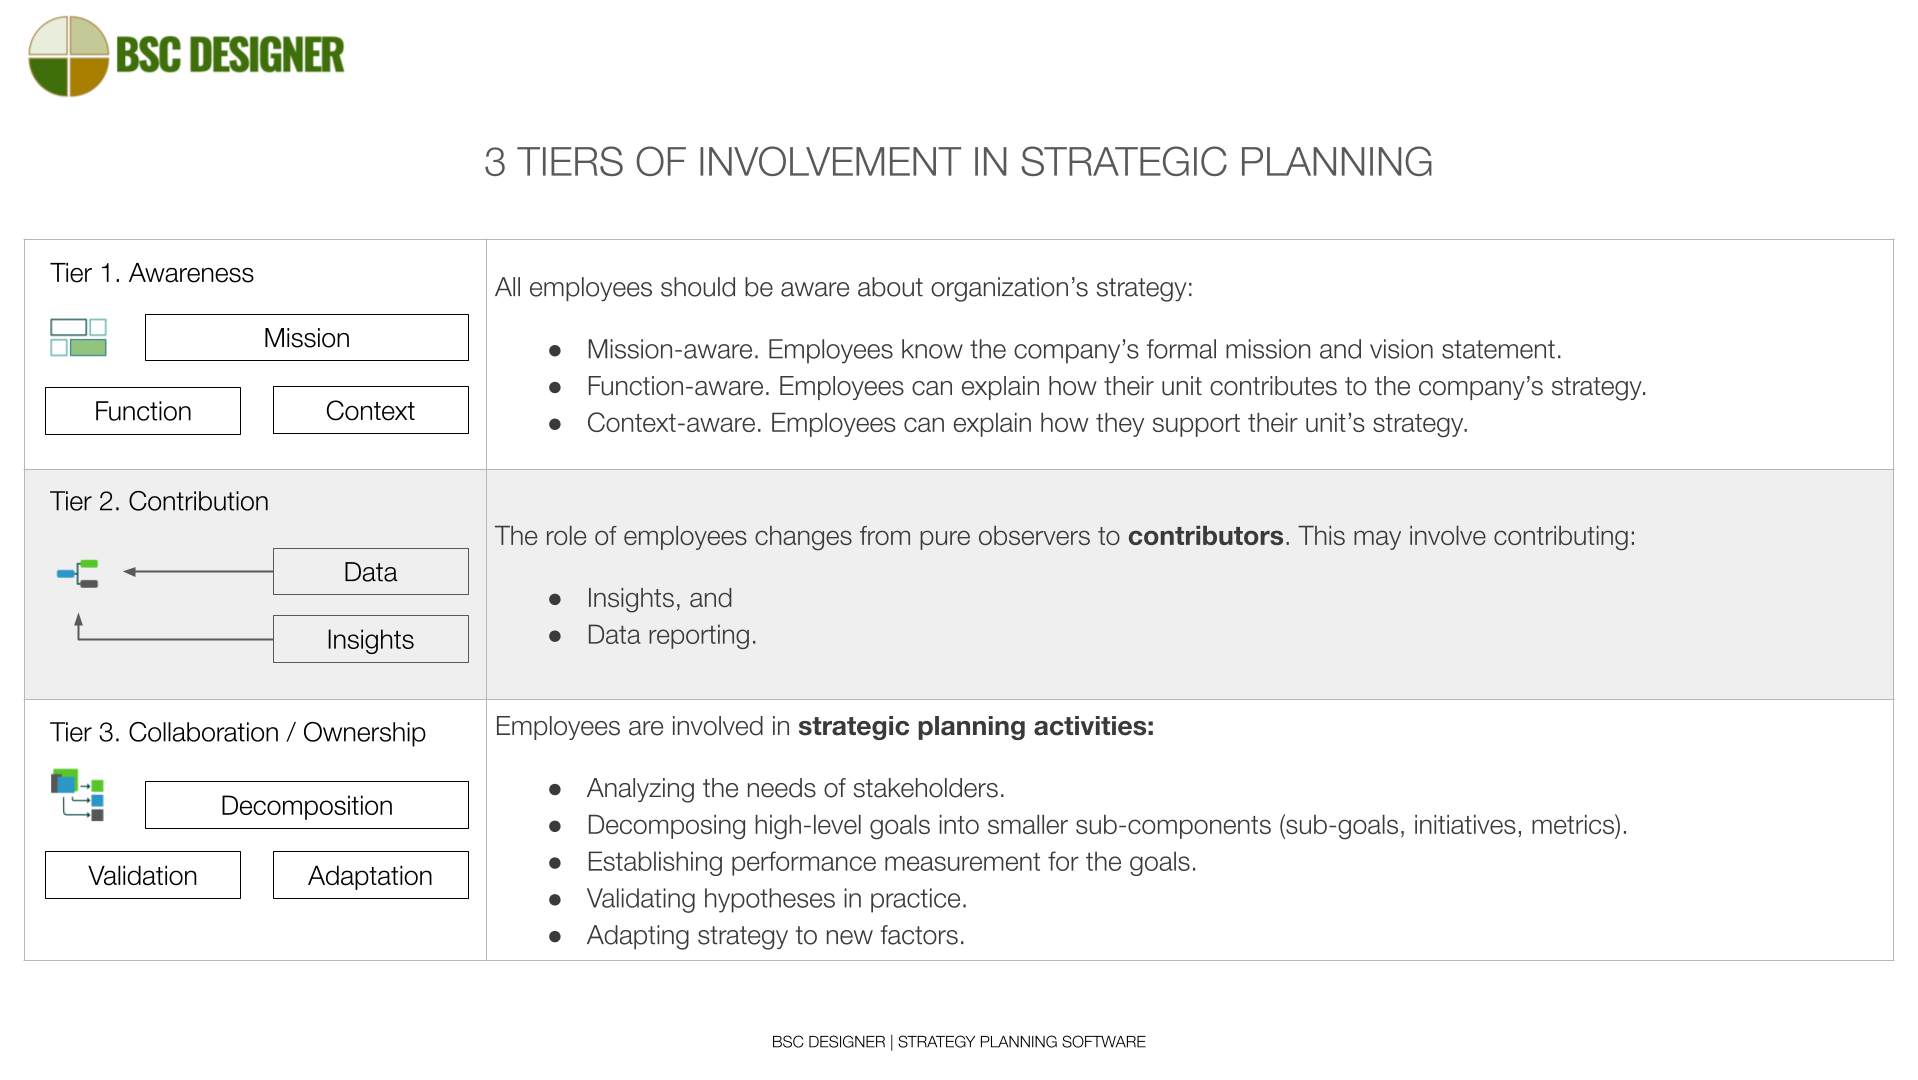 3 tiers of involvement of employees in strategic planning